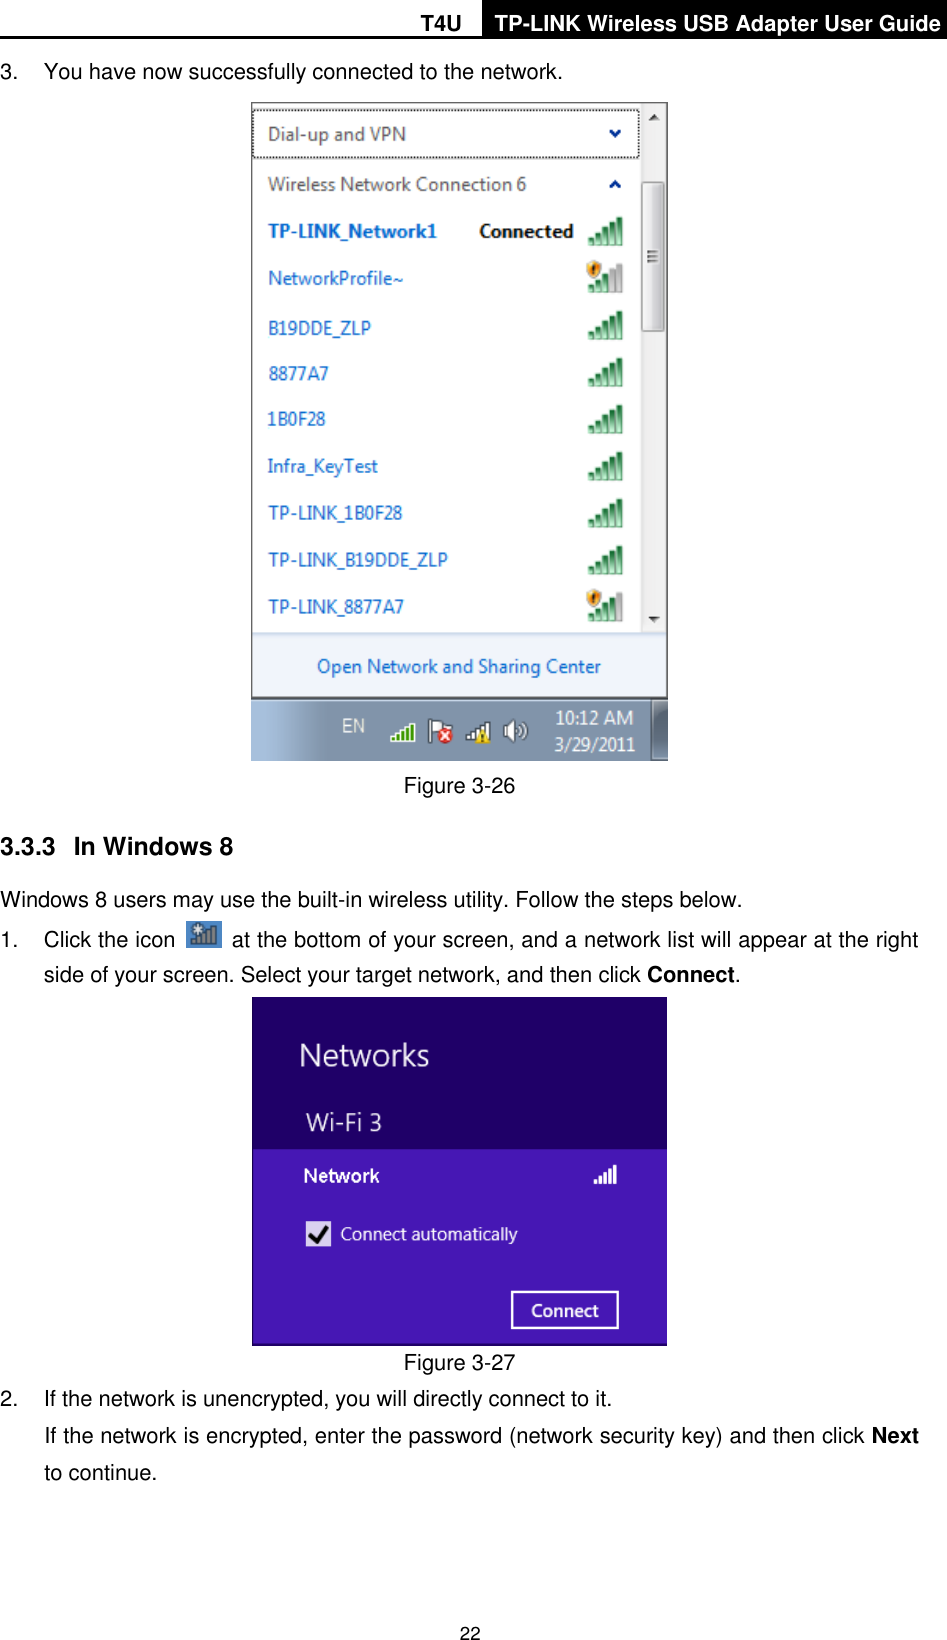 T4U TP-LINK Wireless USB Adapter User Guide   22 3.  You have now successfully connected to the network.    Figure 3-26 3.3.3  In Windows 8 Windows 8 users may use the built-in wireless utility. Follow the steps below. 1.  Click the icon    at the bottom of your screen, and a network list will appear at the right side of your screen. Select your target network, and then click Connect.  Figure 3-27 2.  If the network is unencrypted, you will directly connect to it.   If the network is encrypted, enter the password (network security key) and then click Next to continue. 